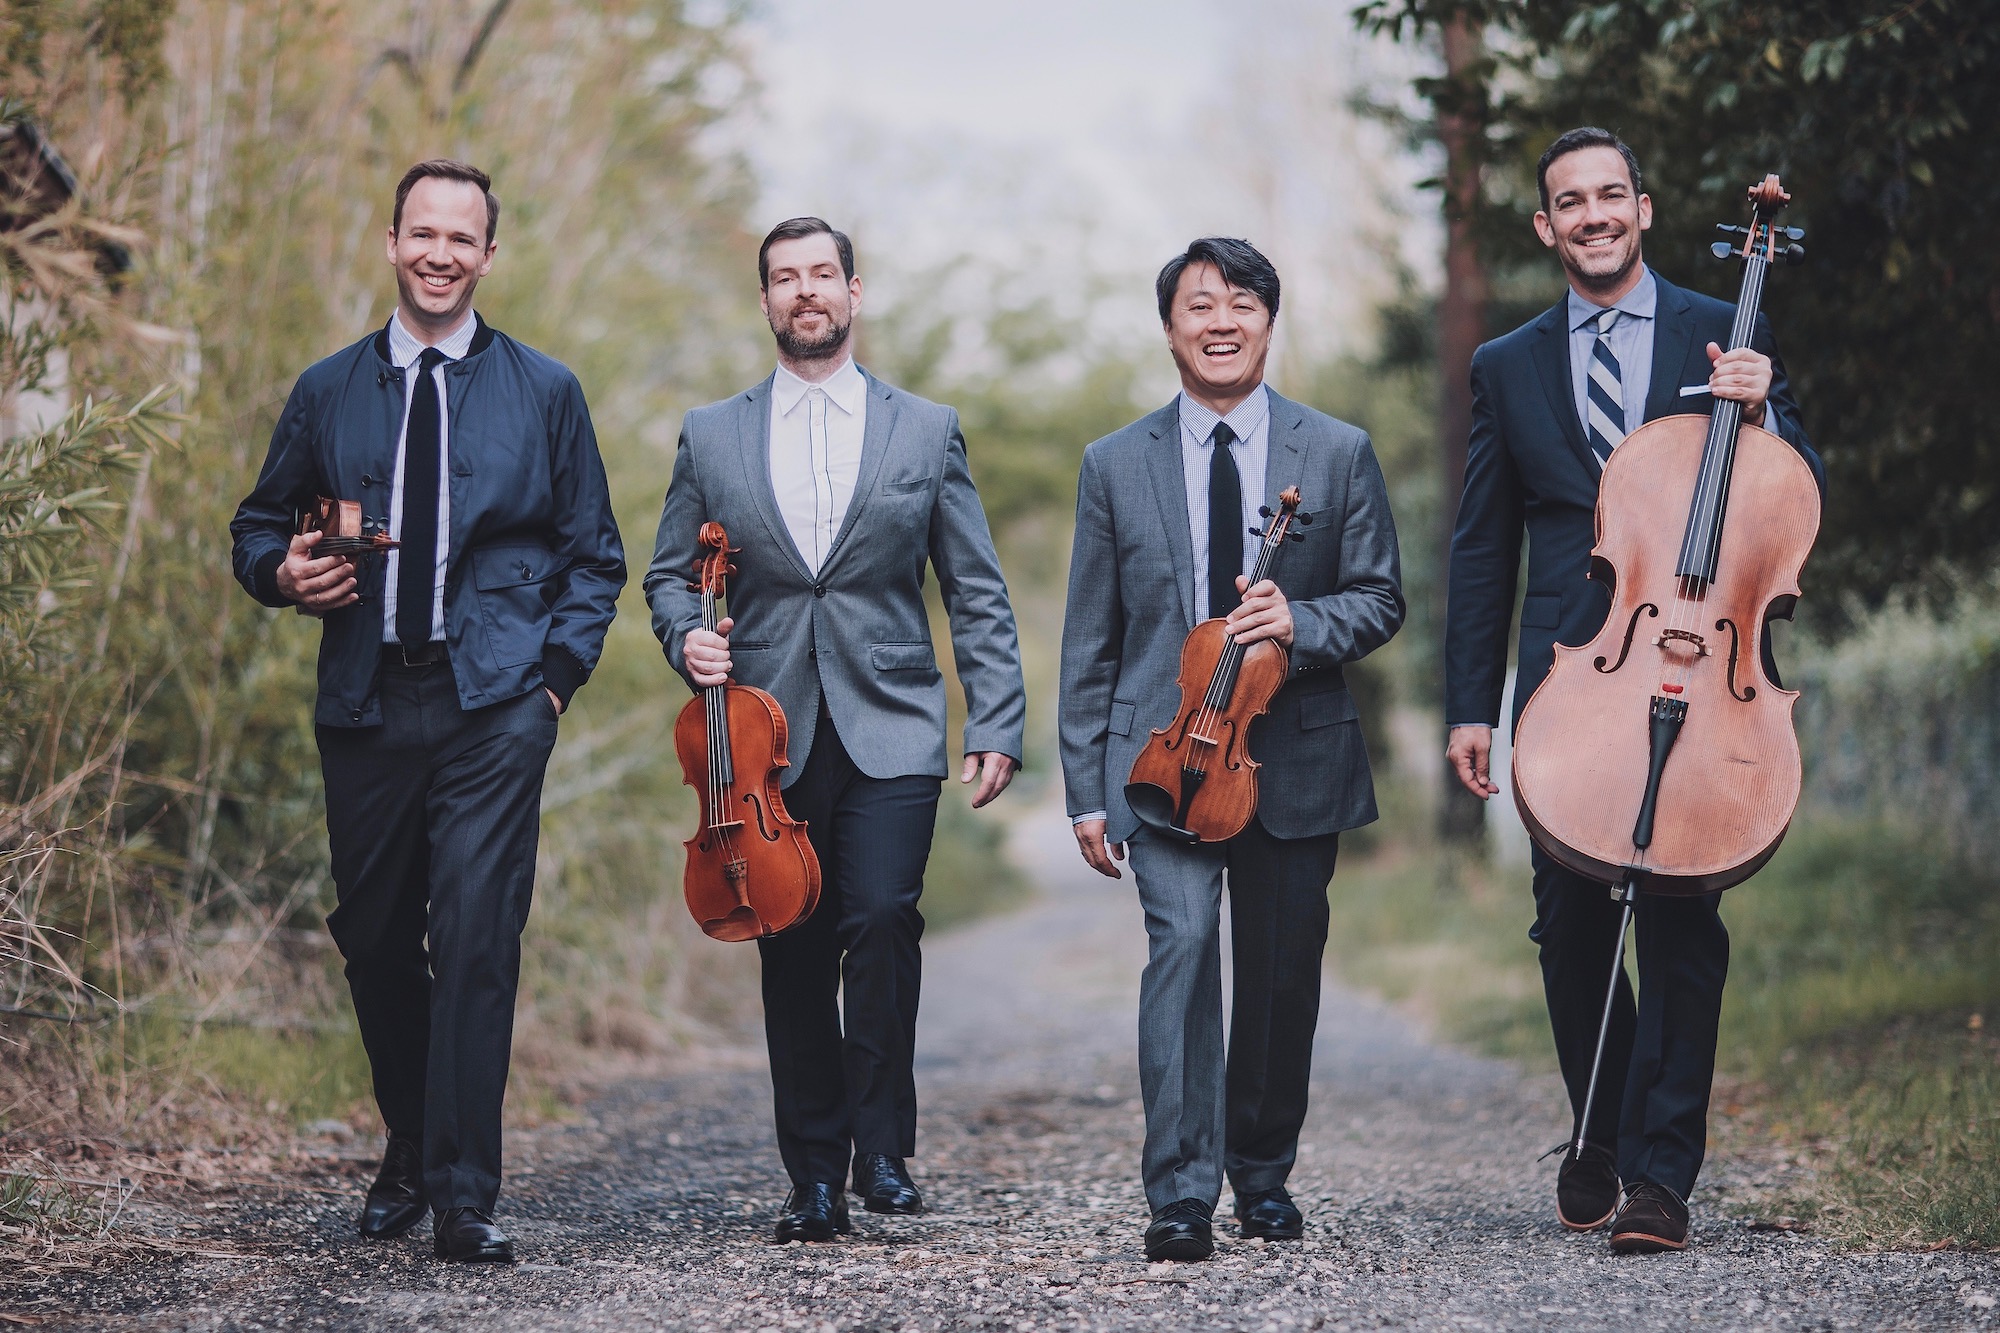 During the week, the Miró Quartet will be in residence at APSU as a holder of the Roy Acuff Chair of Excellence. Courtesy: Miro Quartet